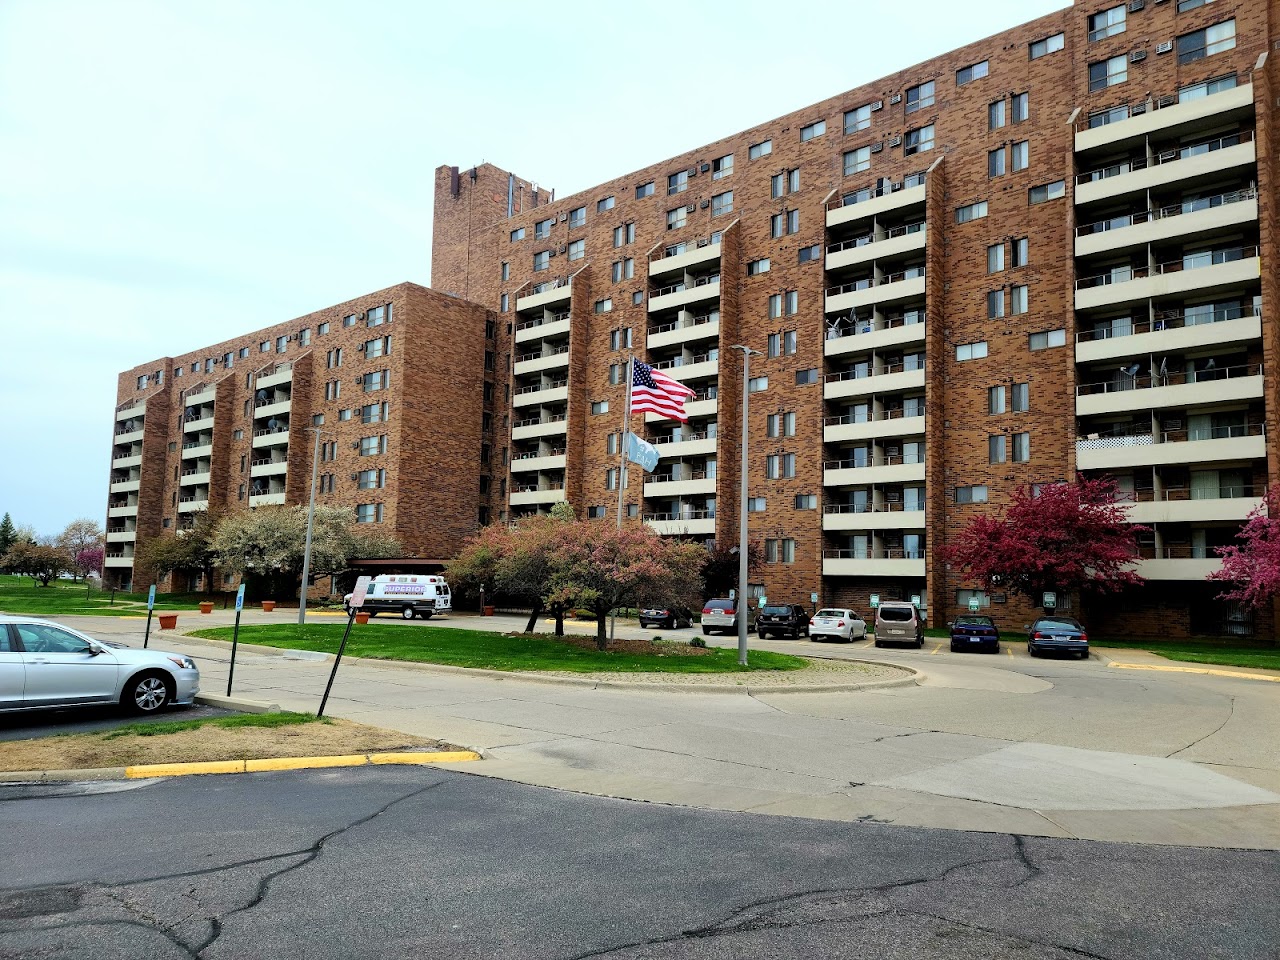 Photo of 920 ON THE PARK. Affordable housing located at 920 JOHN R RD TROY, MI 48083